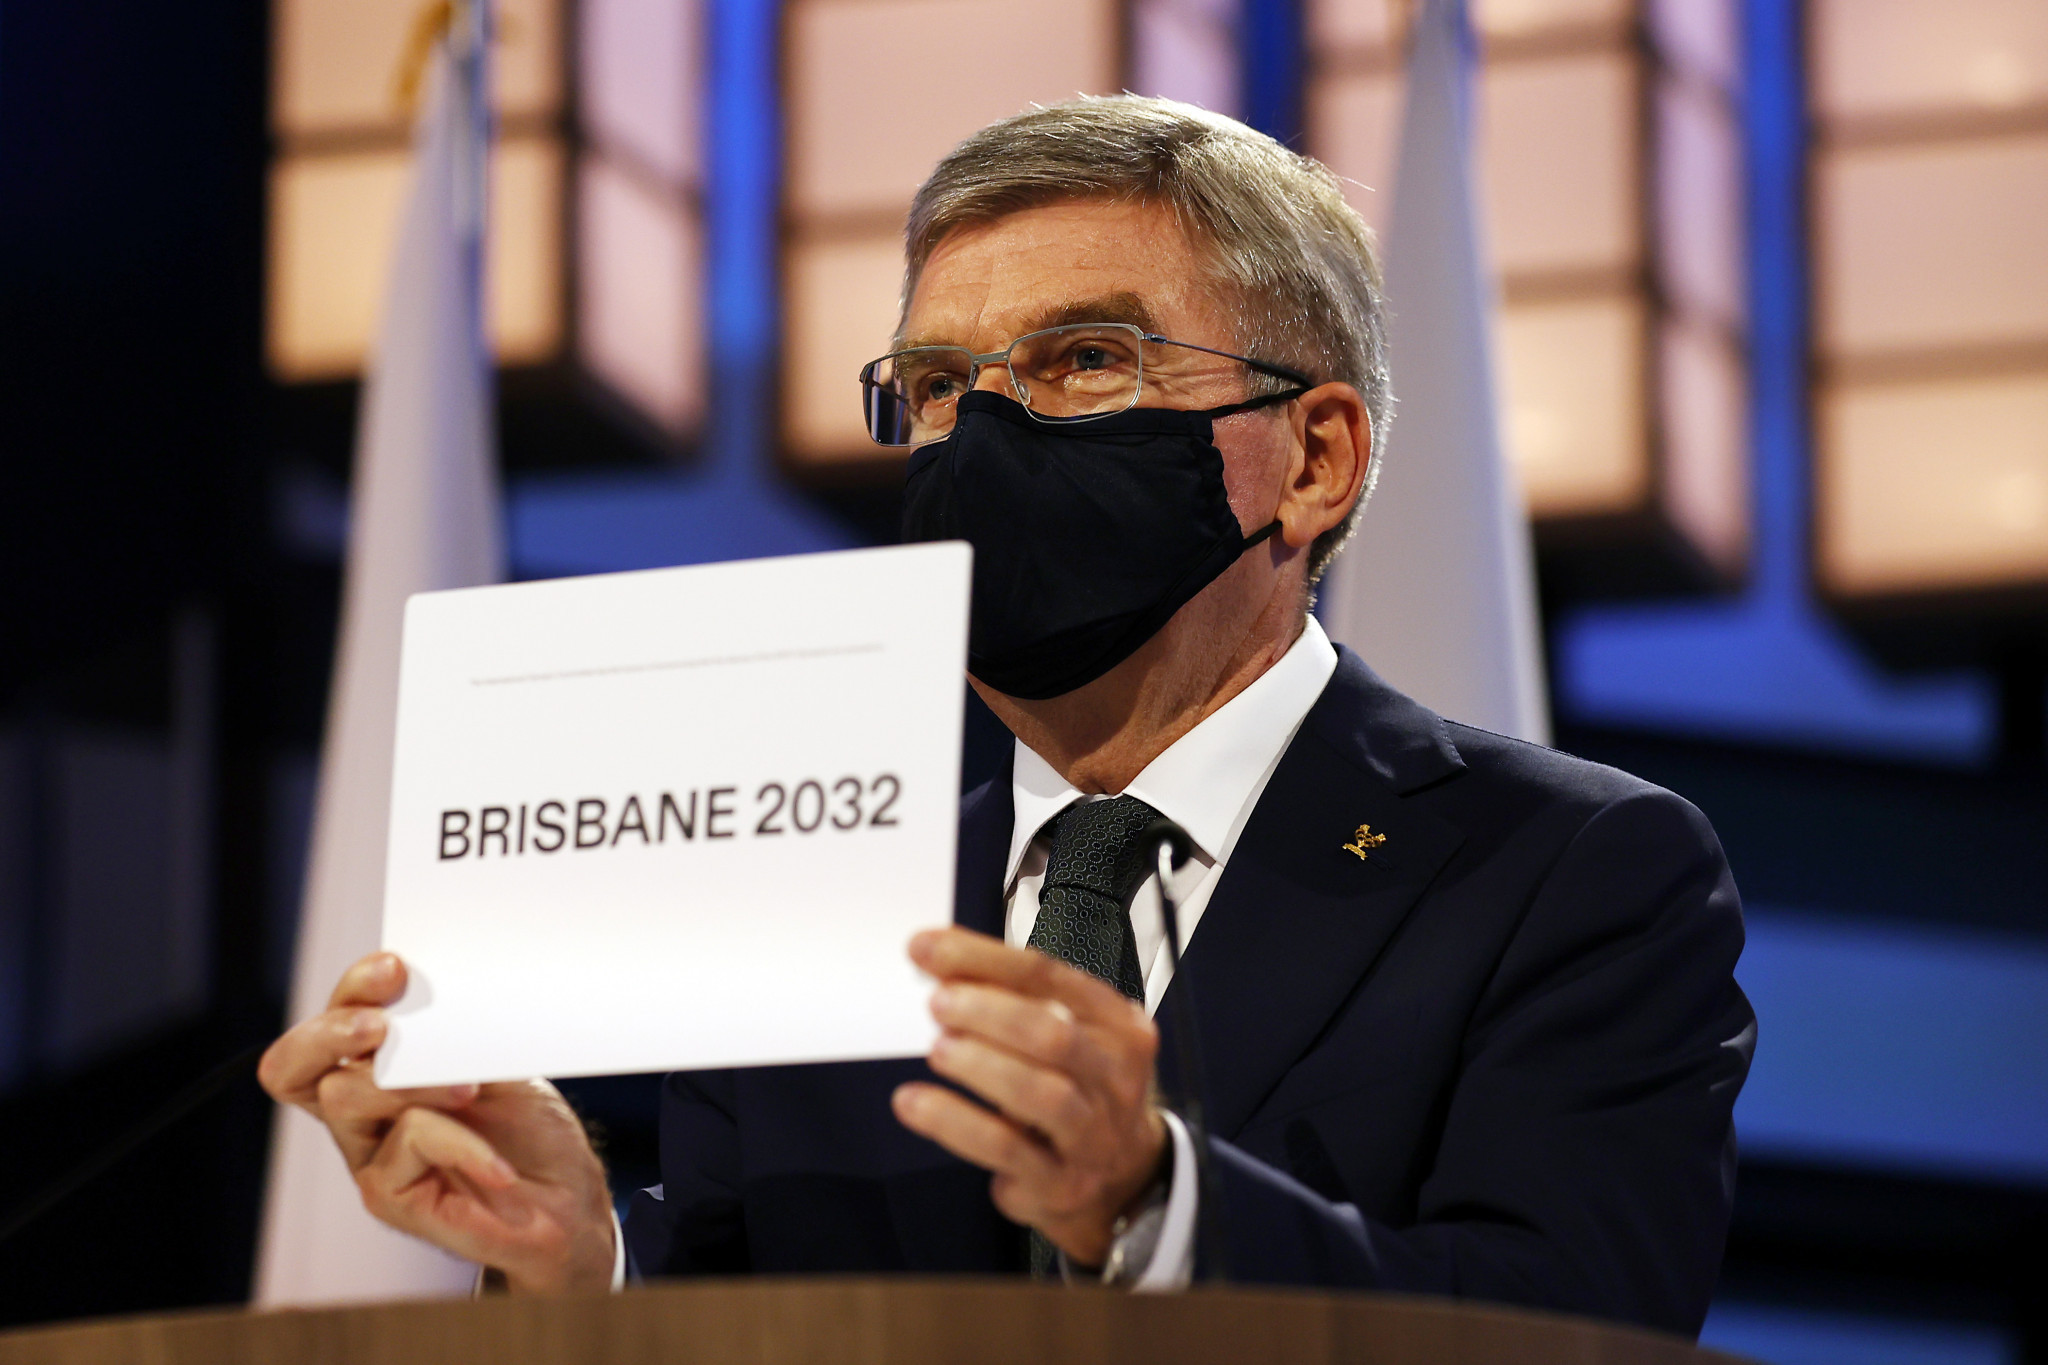 Brisbane was officially awarded the 2032 Olympic Games at the IOC Session prior to Tokyo 2020 ©Getty Images